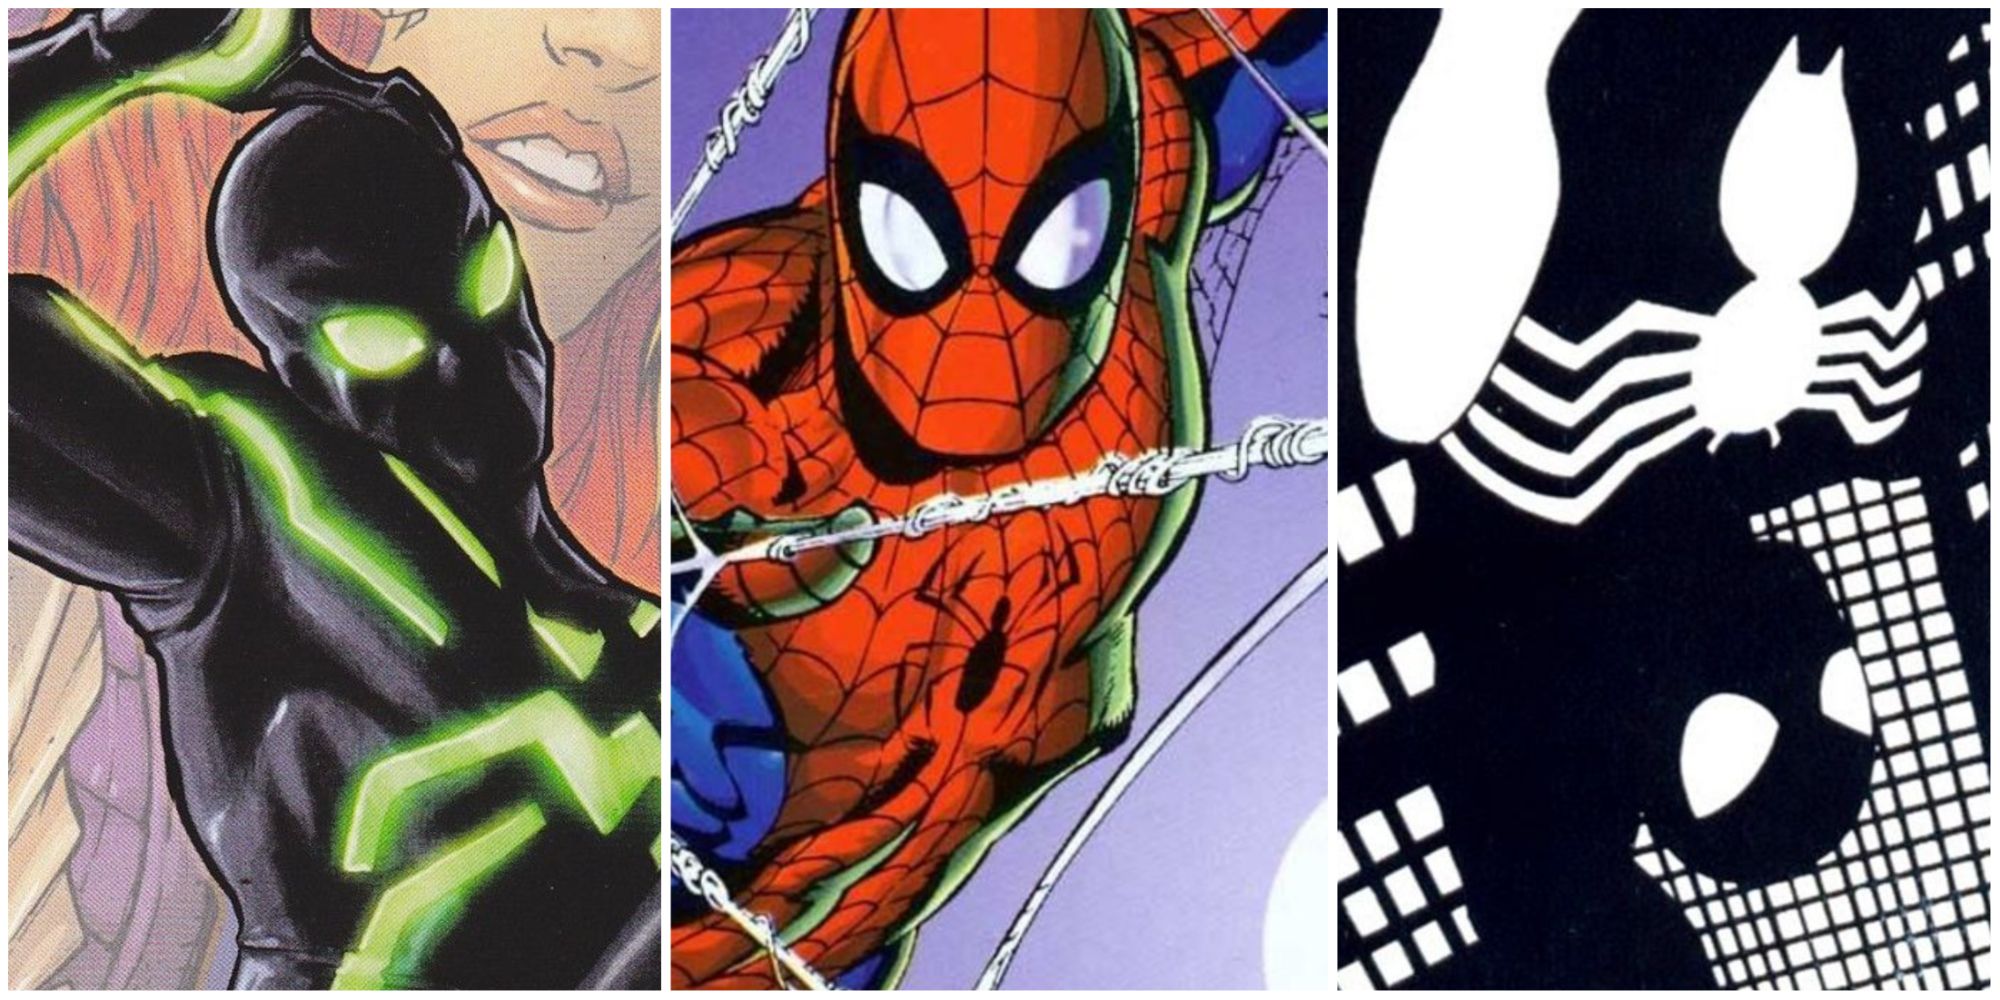 A split image of Spider-Man in his stealth suit, of Spider-Man shooting webs, and of Spider-Man swinging through the city in black and white art and using his black costume (right) are all ways Spider-Man could improve his tactics